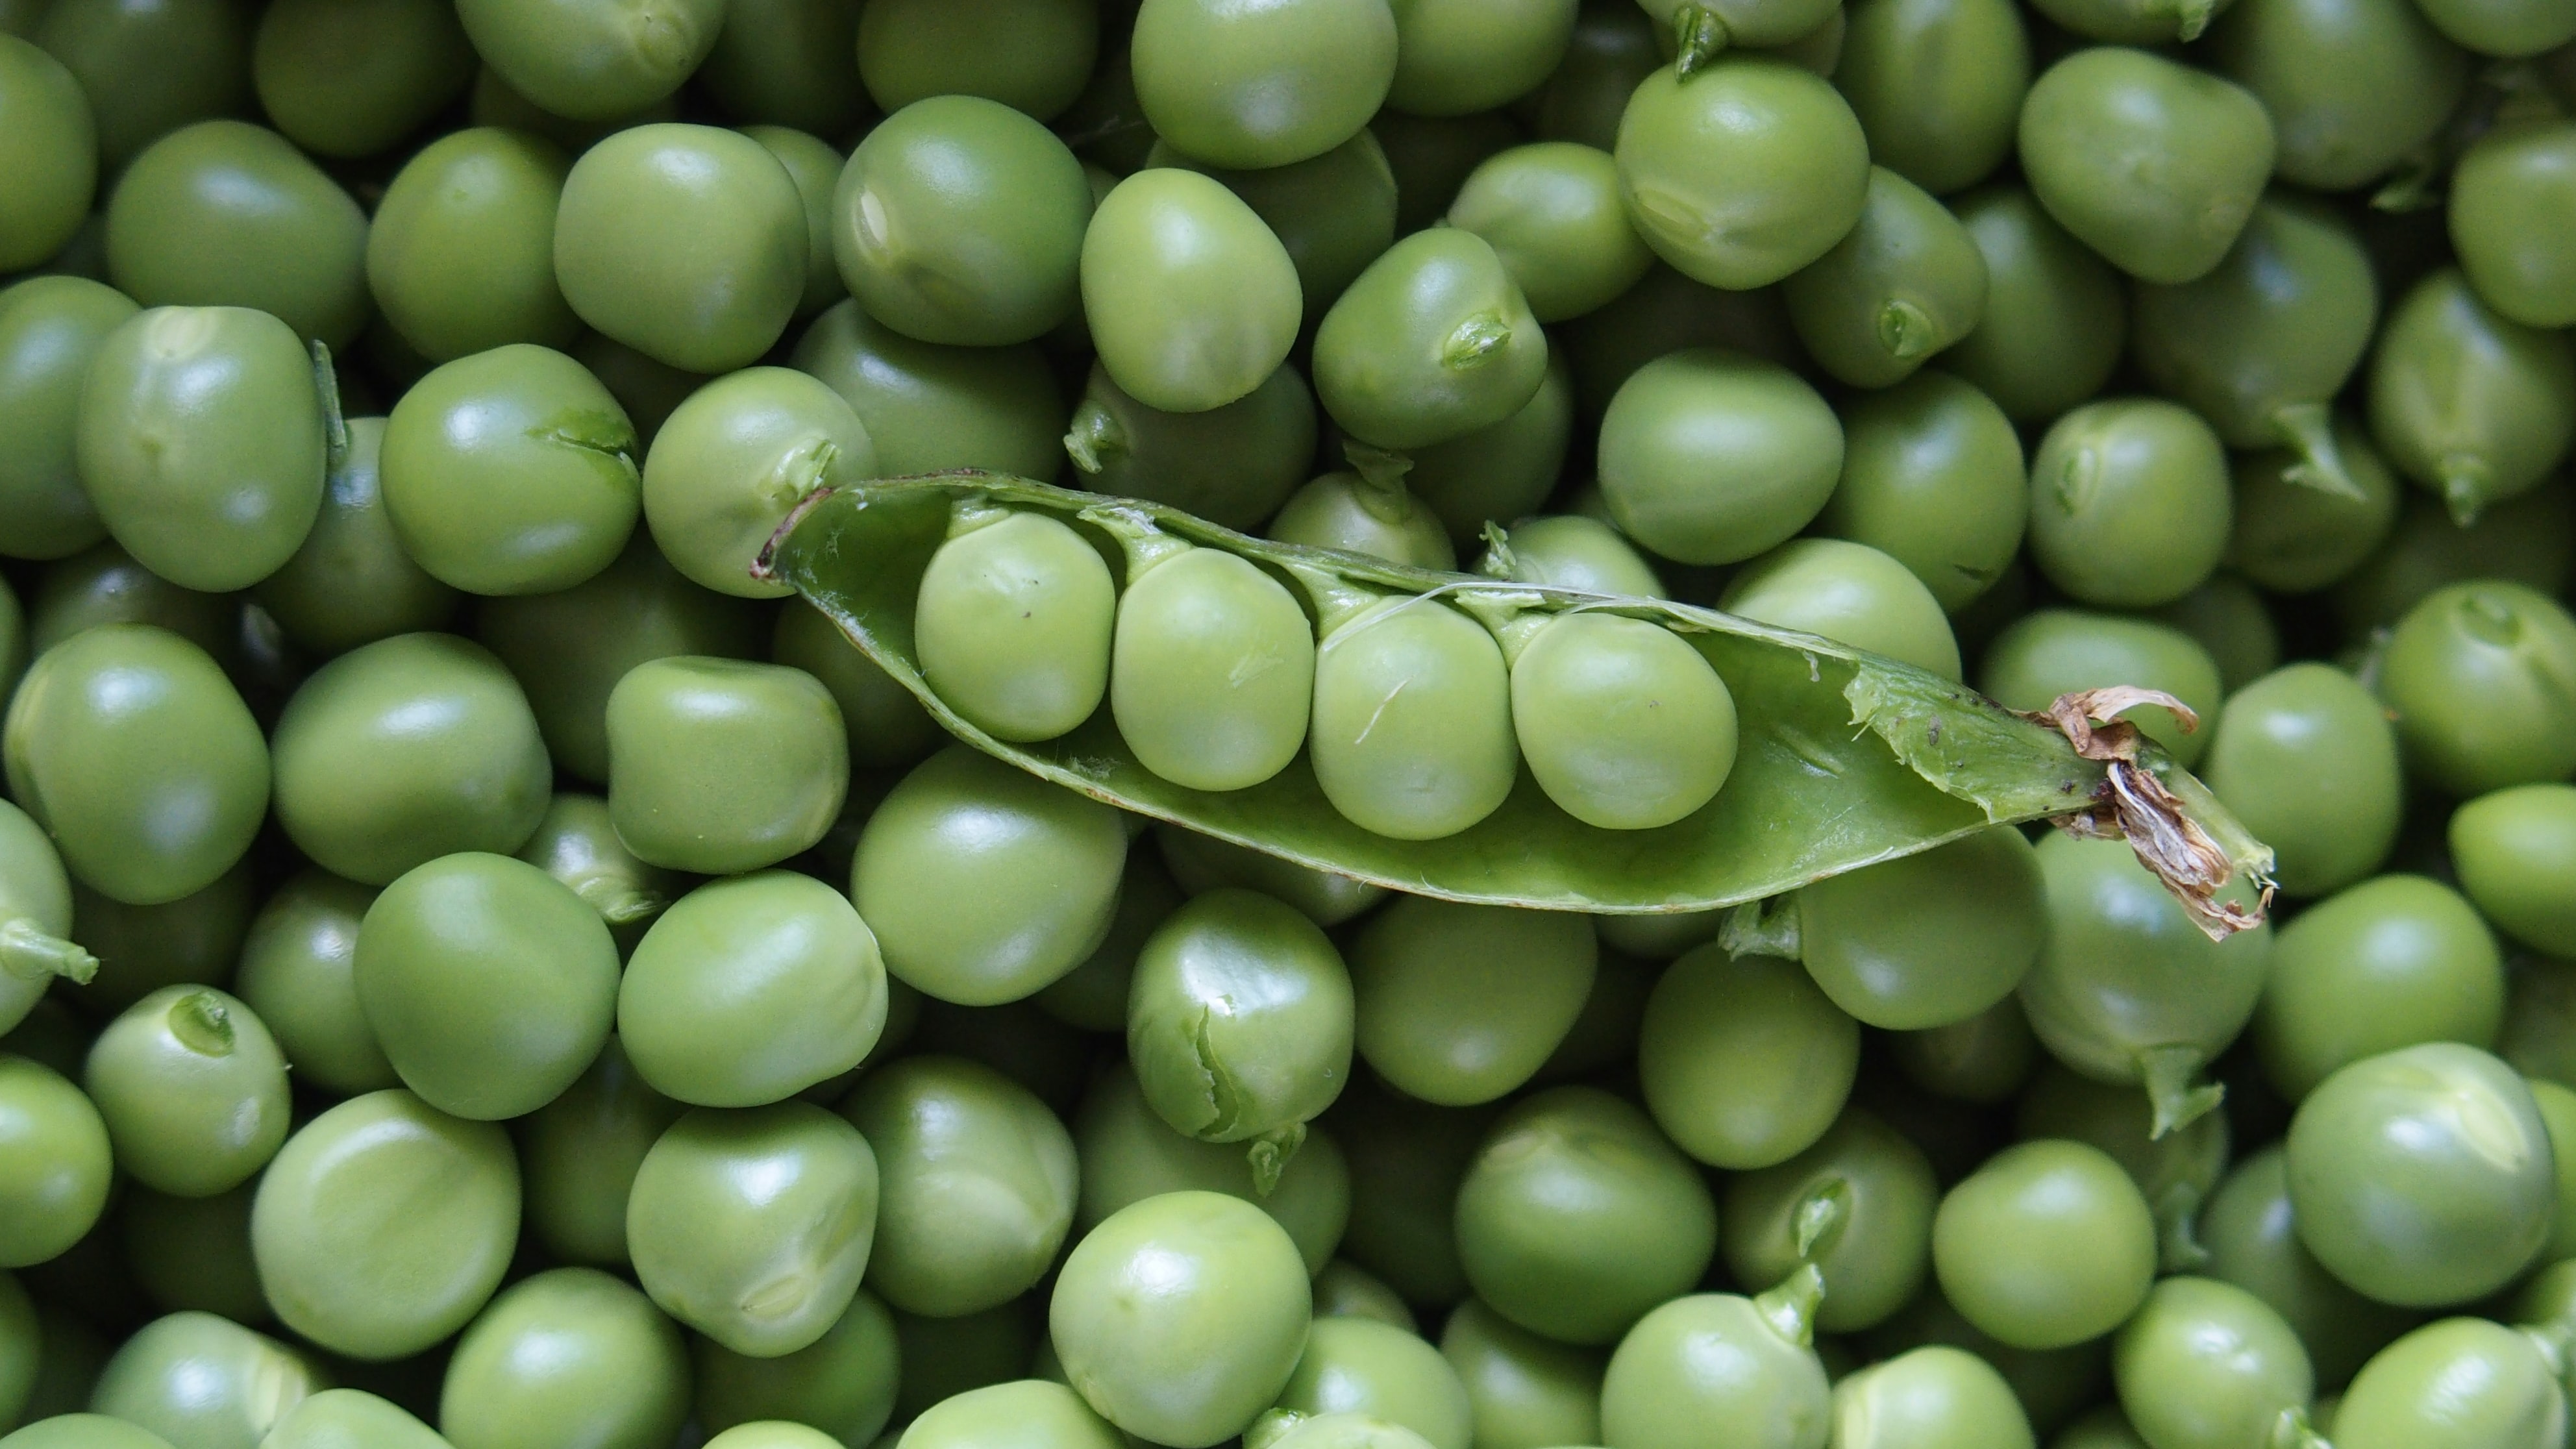 Peas in a pod on a bed of peas